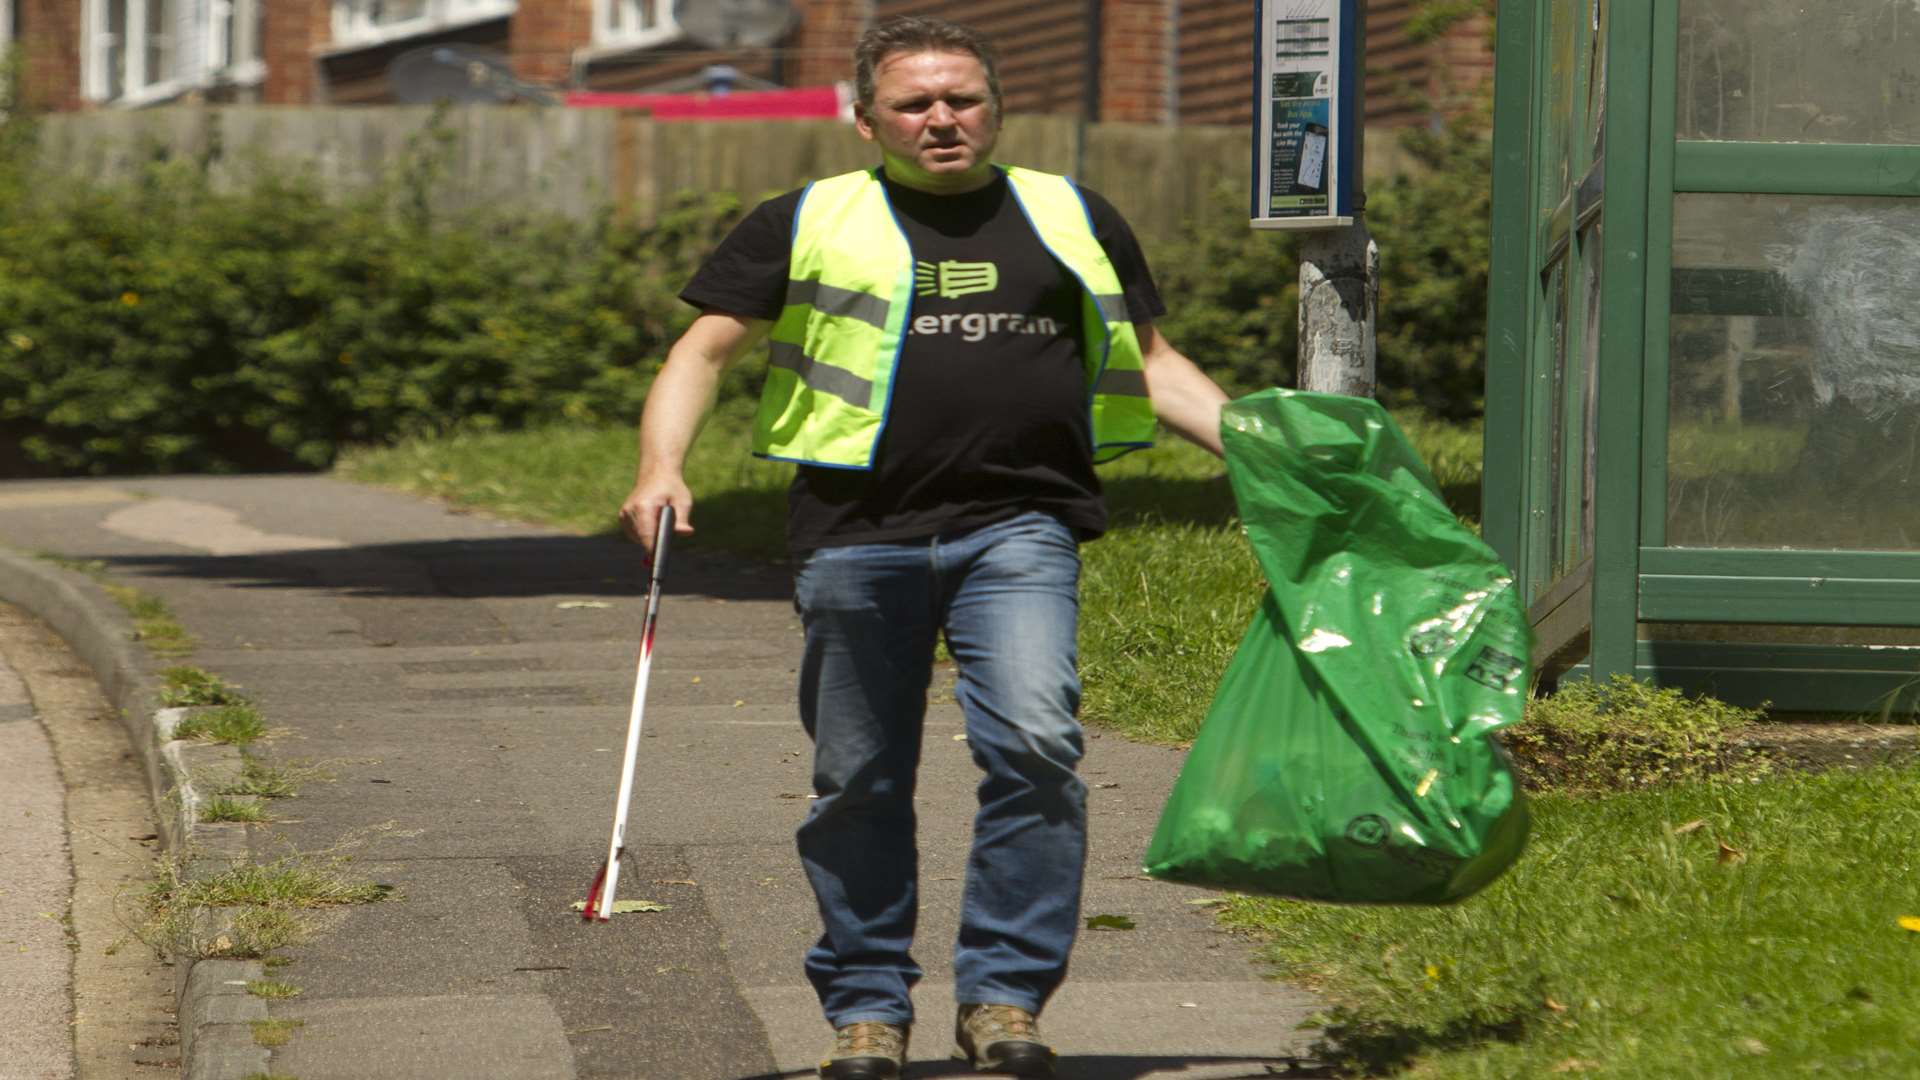 Littergram founder Danny Lucas on a clean up at Clare Park, East Malling